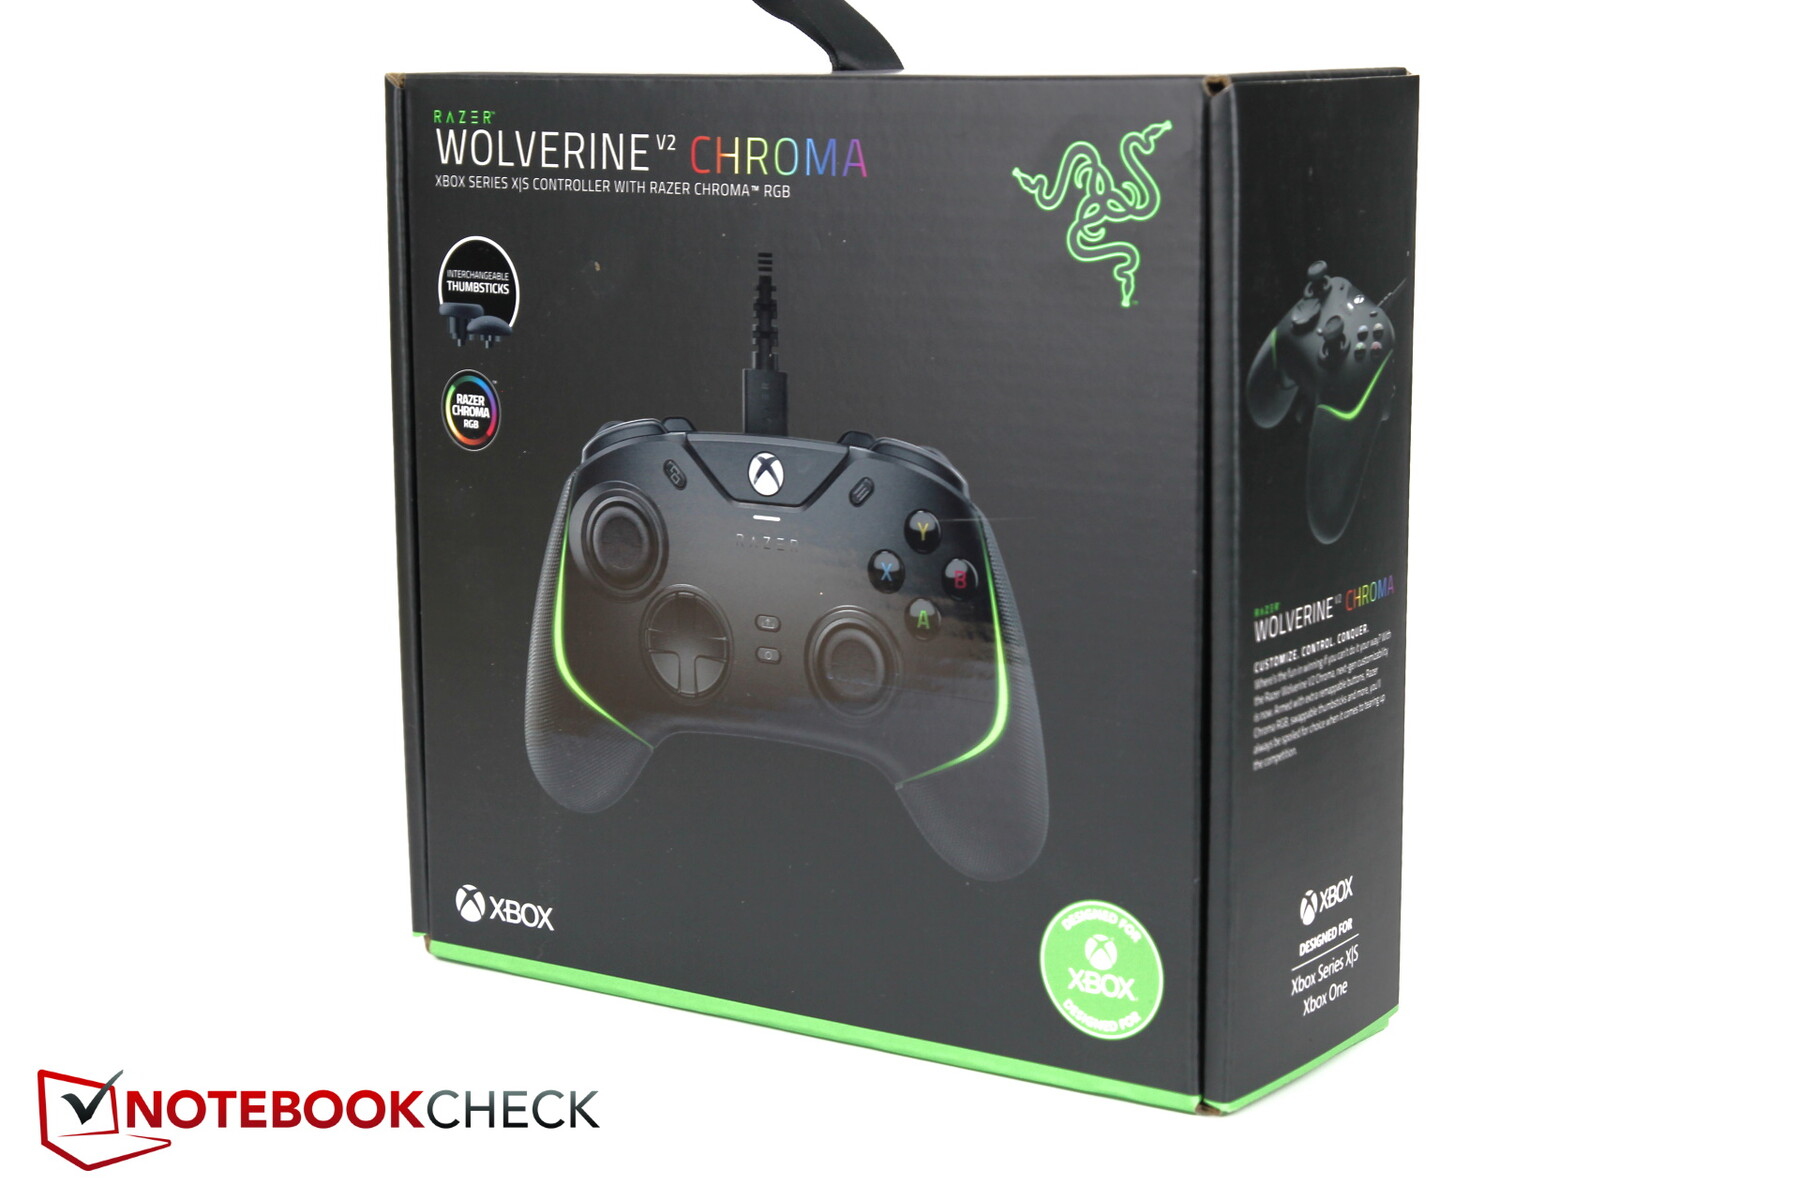 Razer Wolverine V2 Chroma hands-on: NotebookCheck.net mechanical - buttons gamepad with Extravagant Reviews